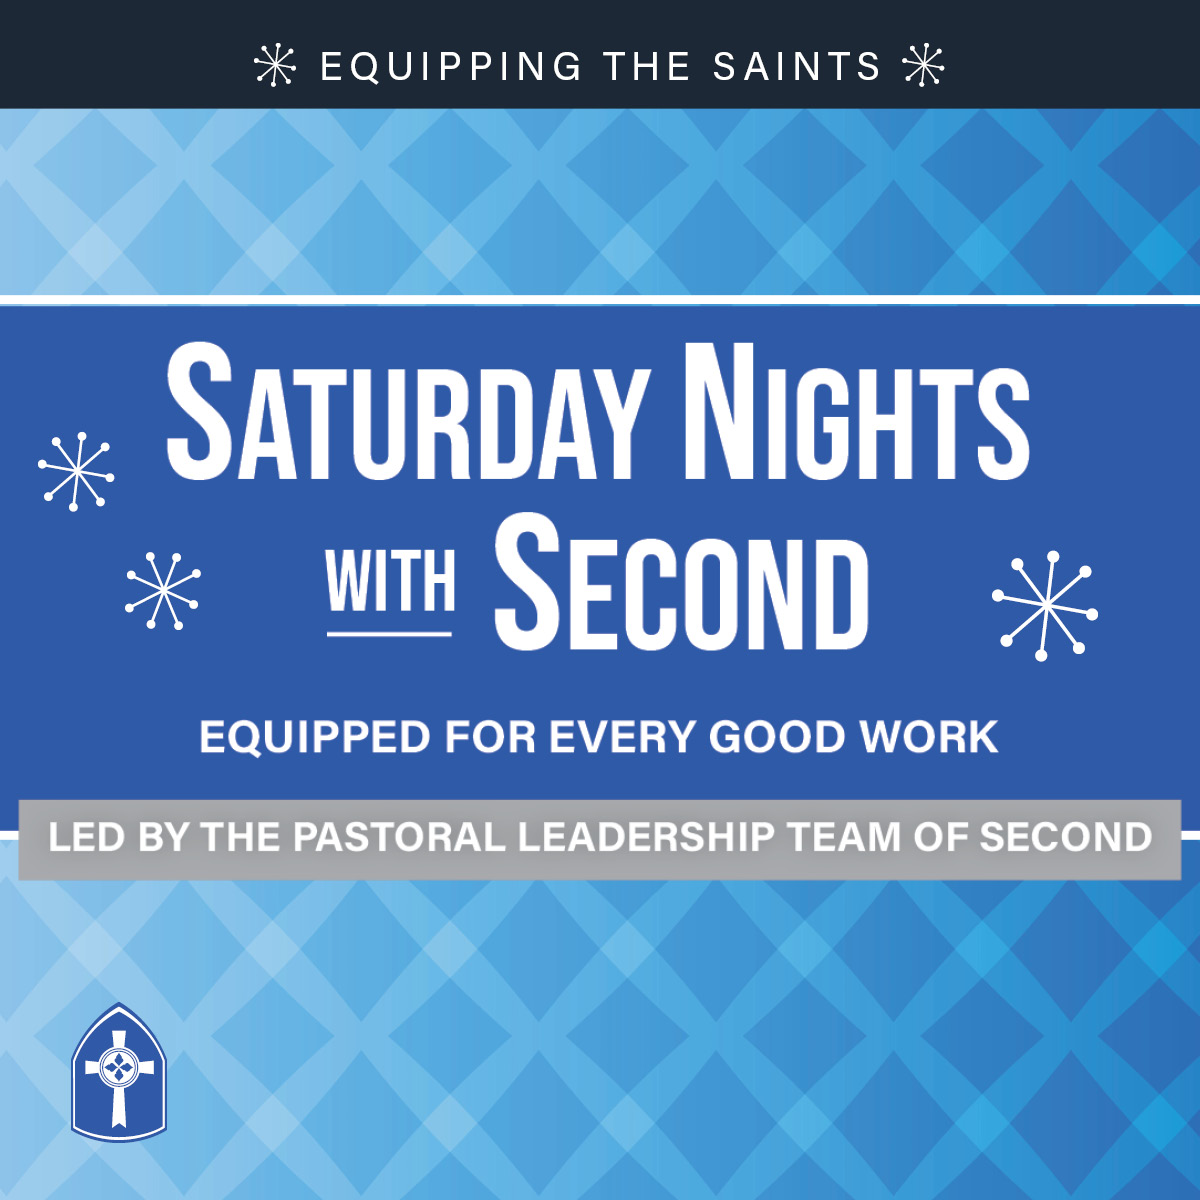 Saturday Nights with Second: Equipped for Every Good Work
Led by the Pastoral Leadership Team of Second

Revisit these sessions from February 2022!
